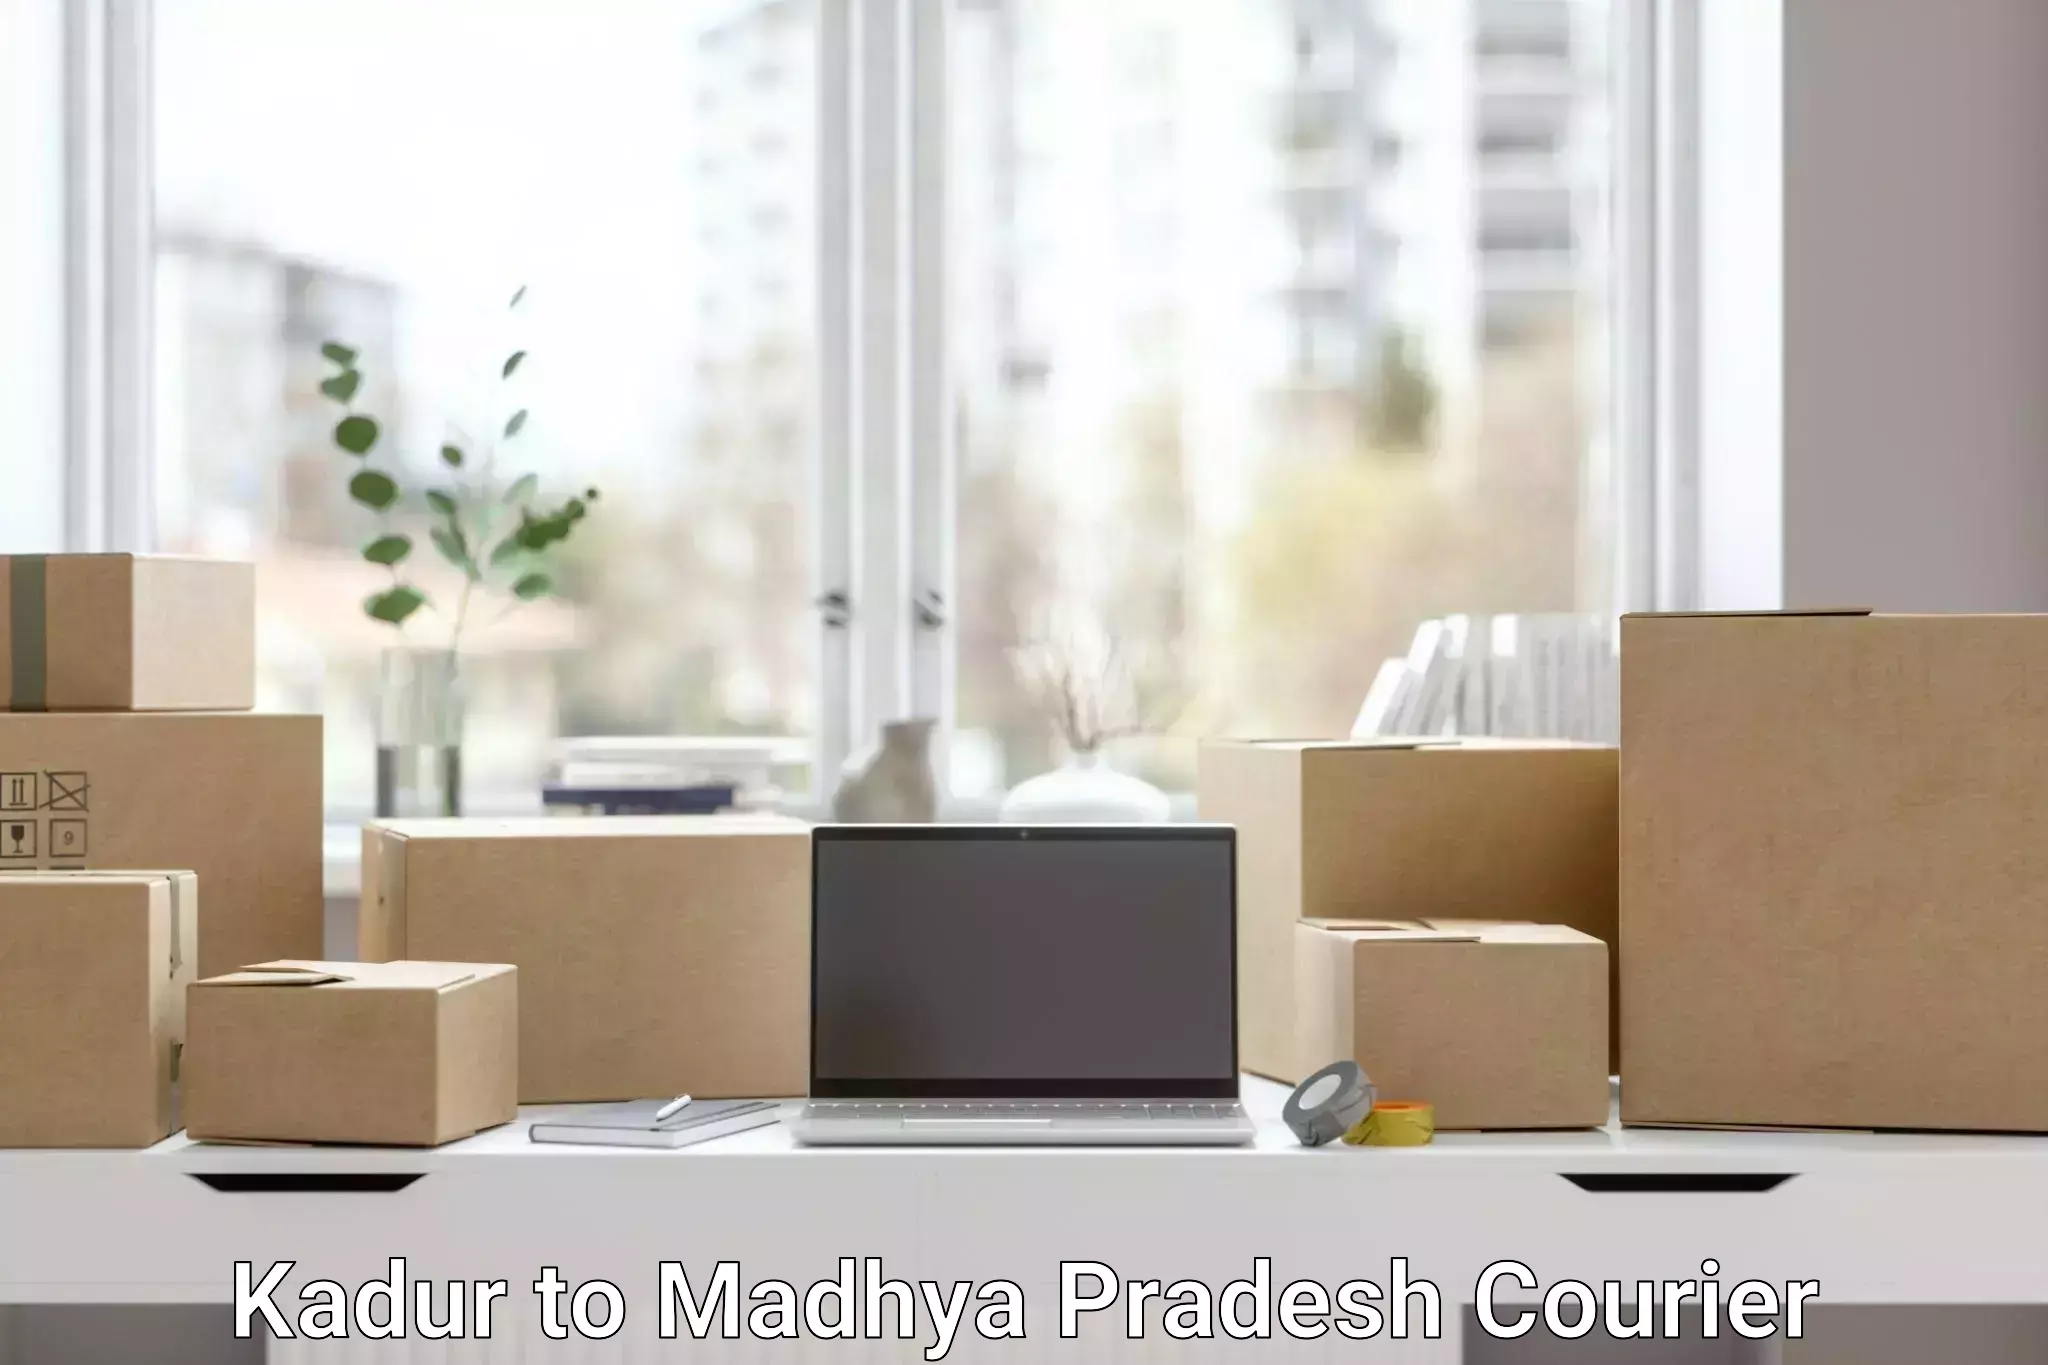 End-to-end delivery in Kadur to Madhya Pradesh